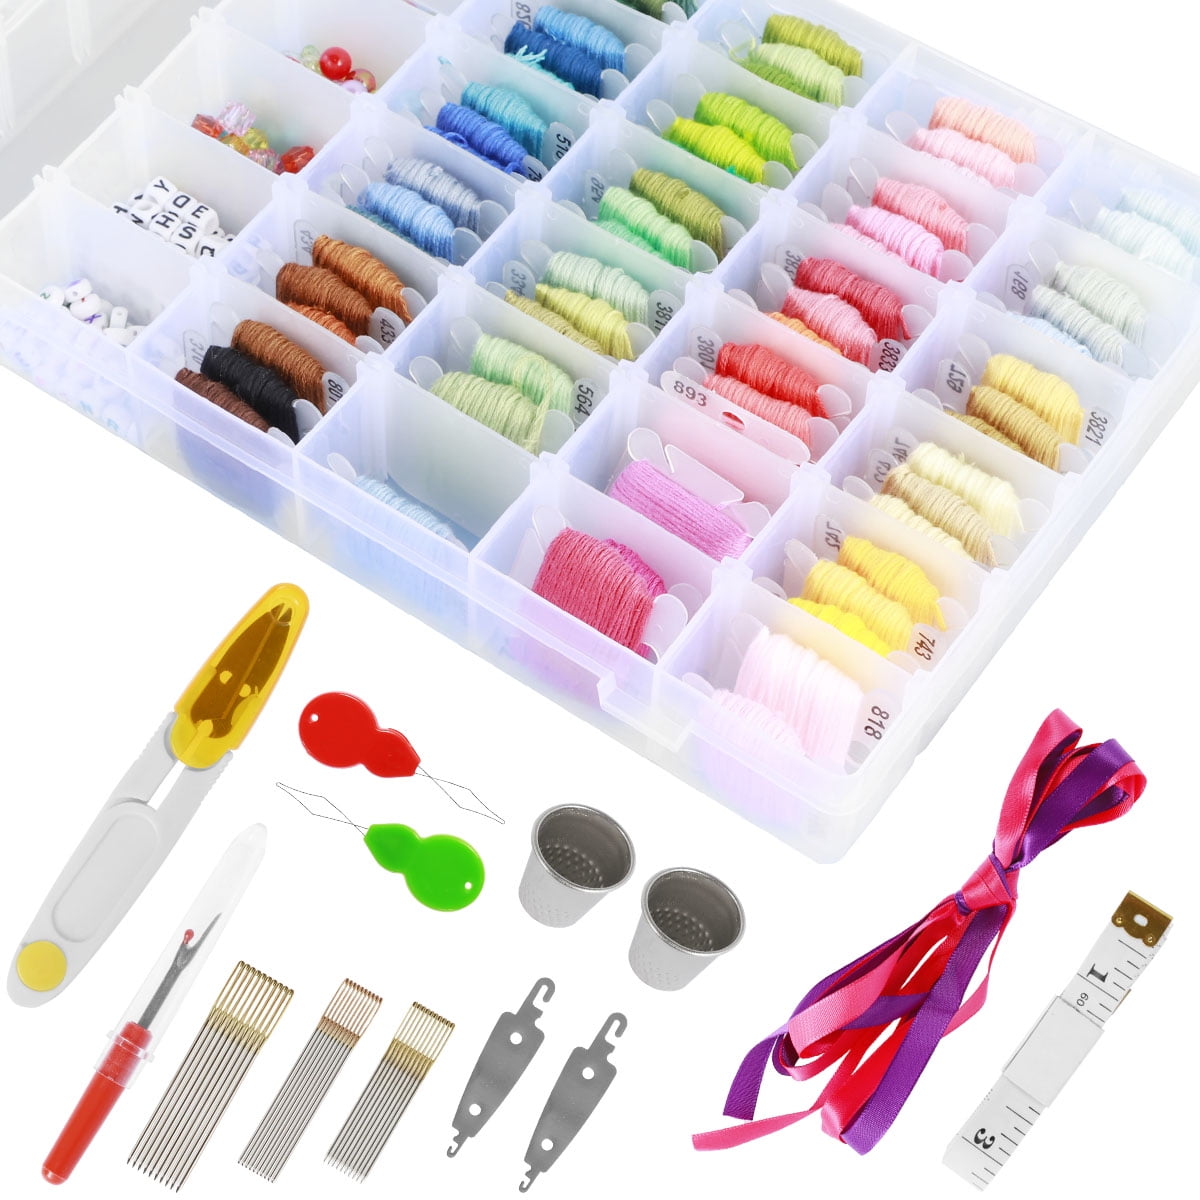 Peirich Embroidery Floss Cross Stitch Threads, Full Friendship Bracelets  String Kit Includes 110 Colors Embroidery Floss